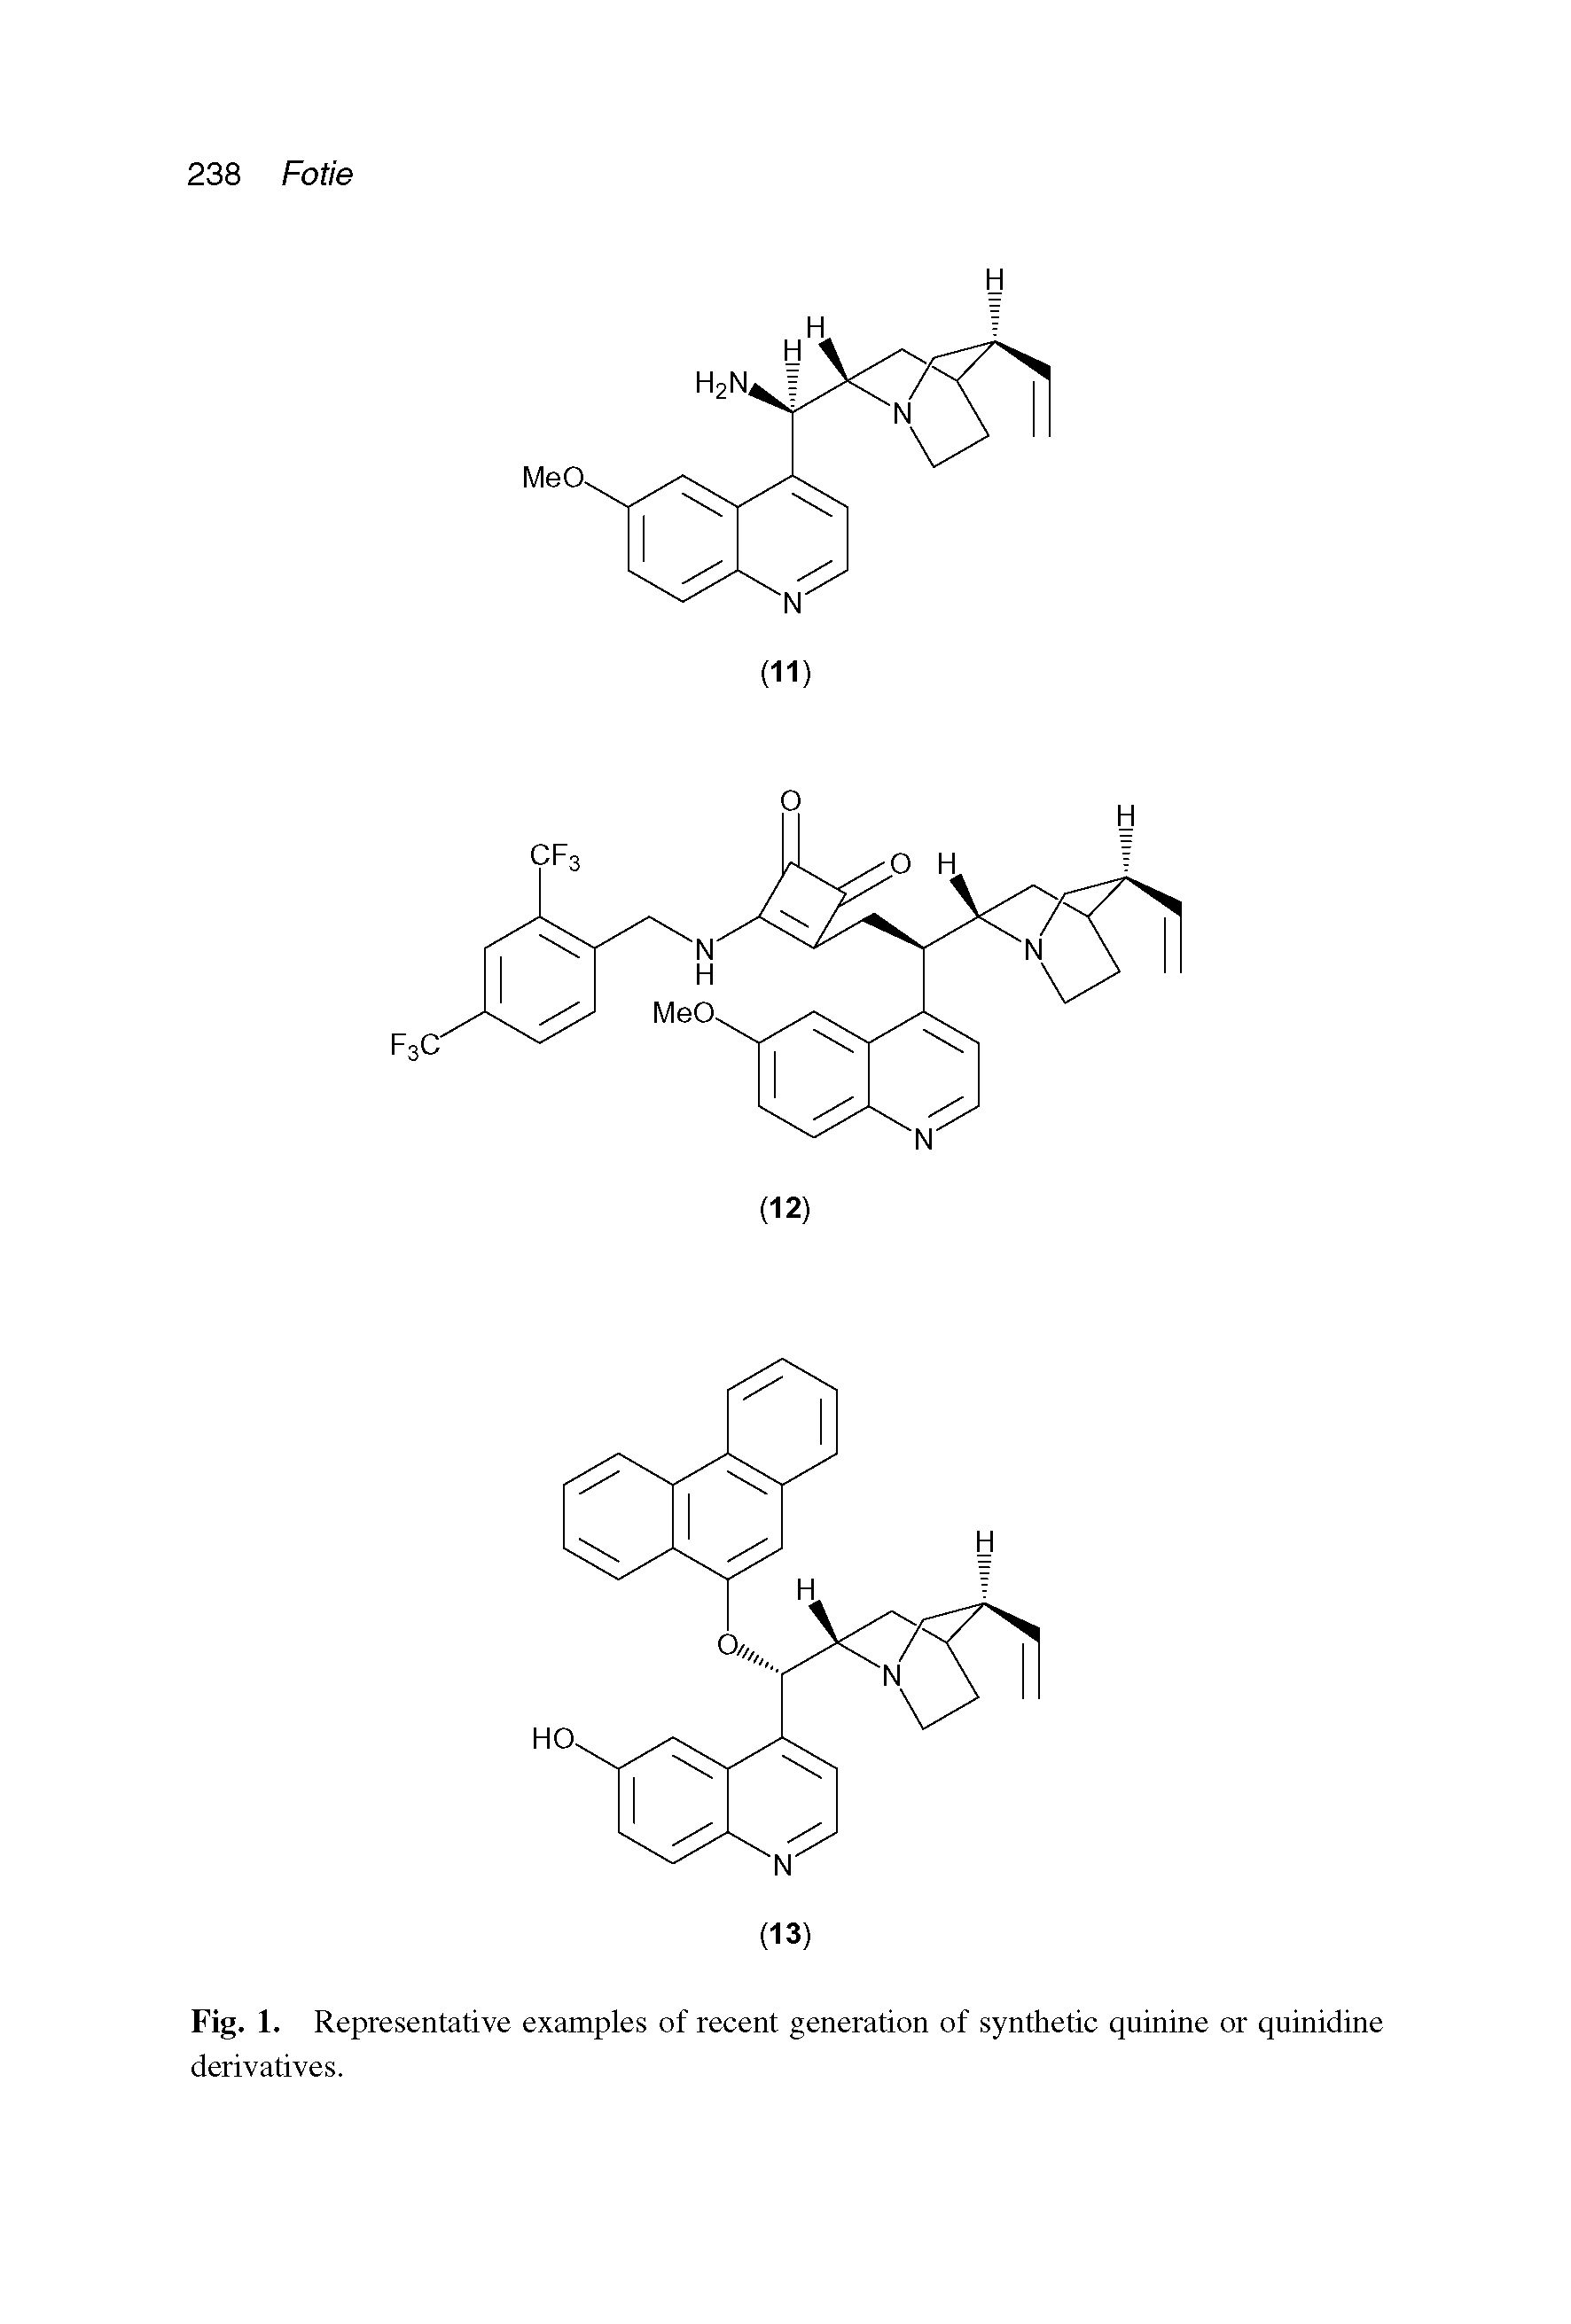 Fig. 1. Representative examples of recent generation of synthetic quinine or quinidine derivatives.